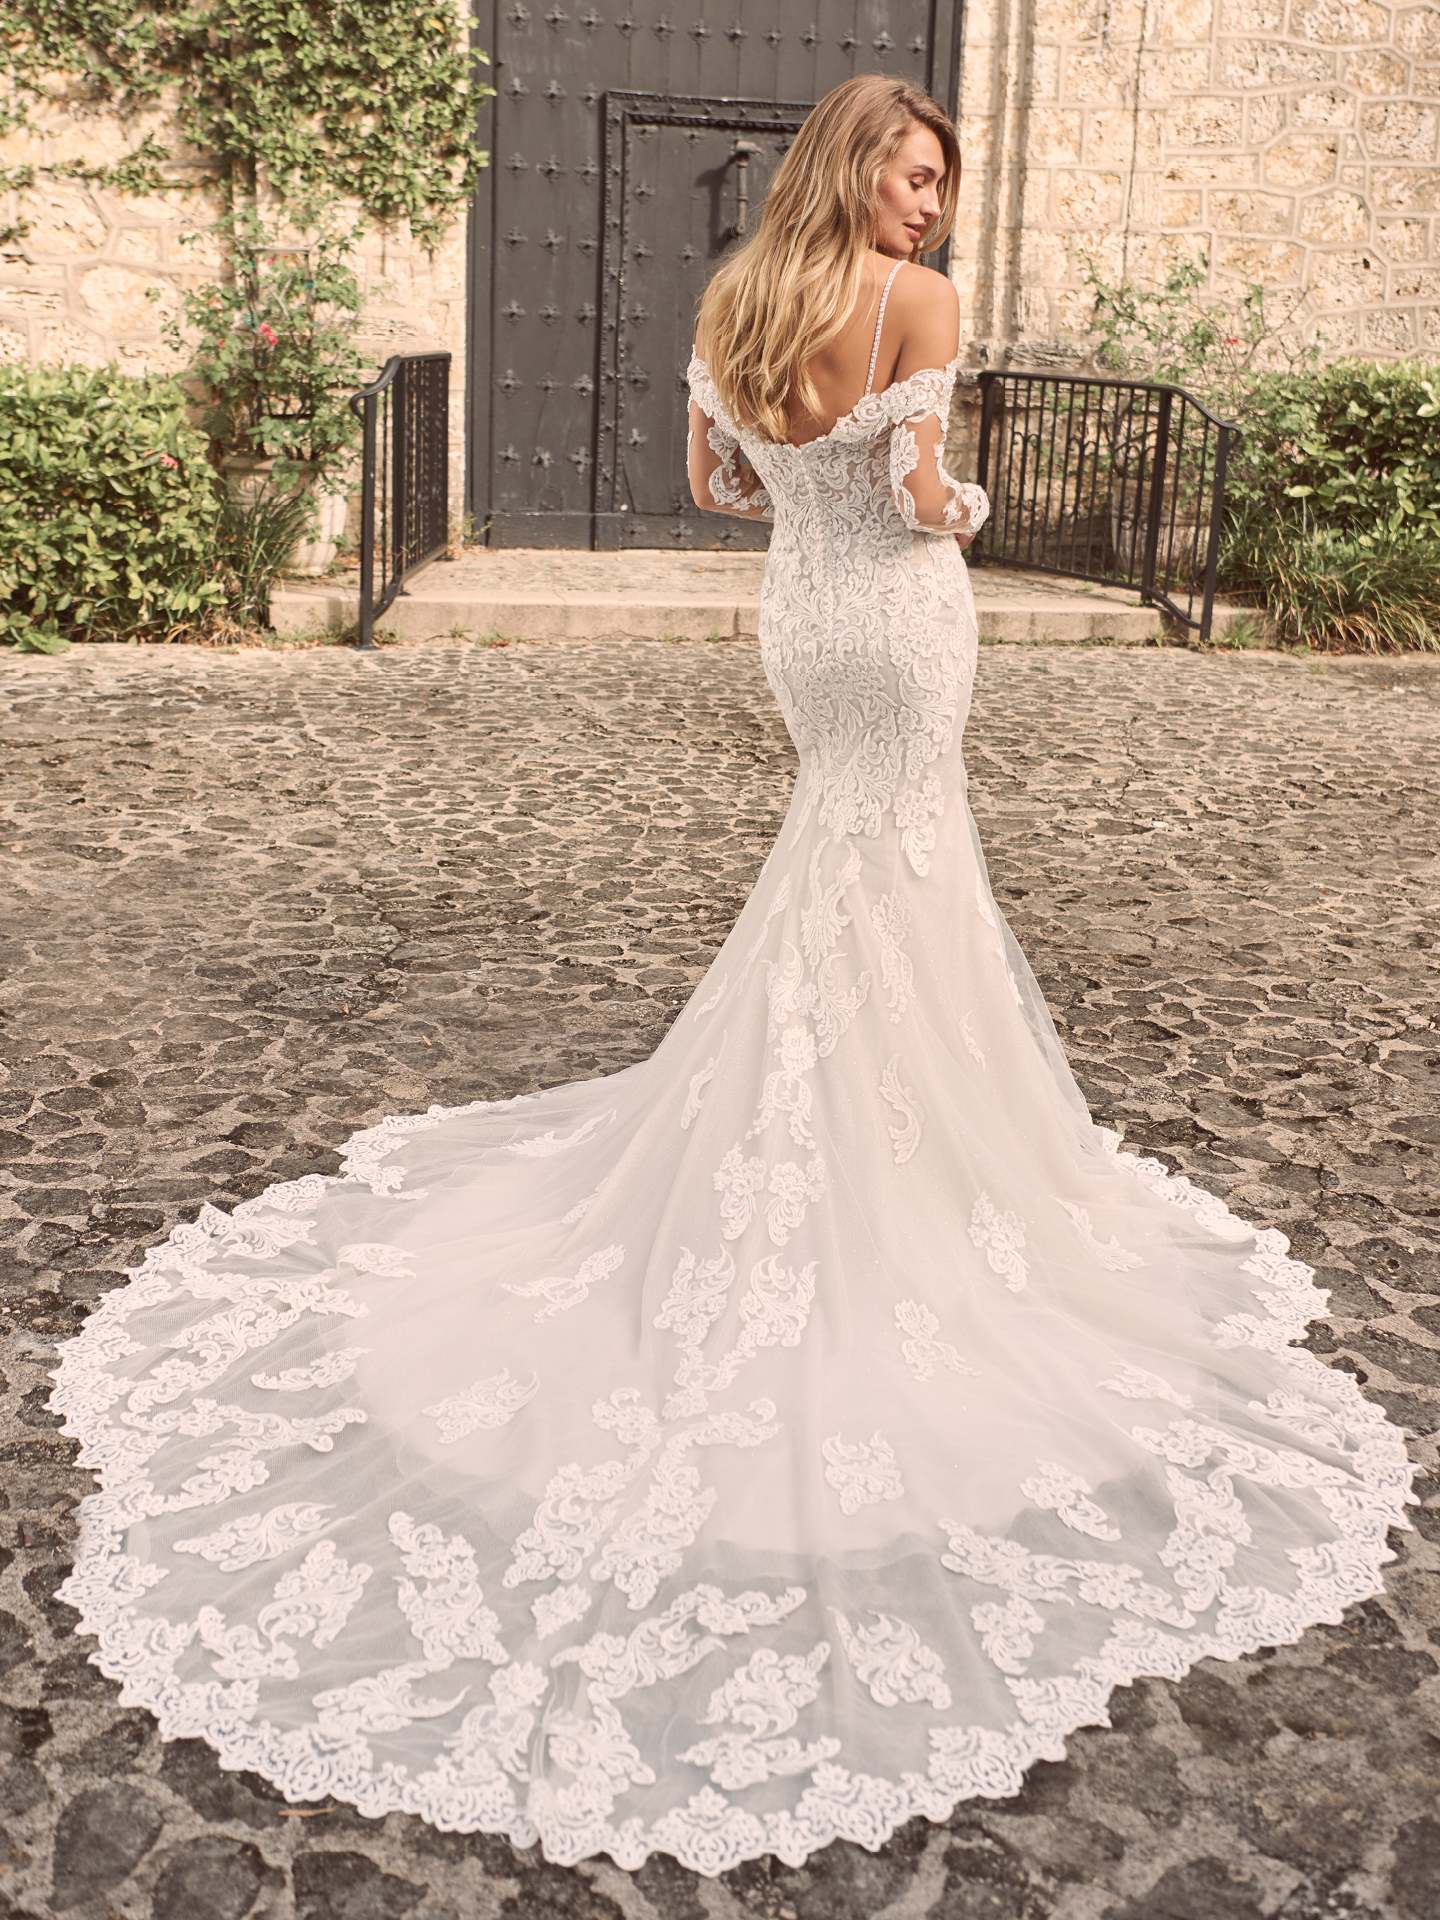 Fiona Sparkly Lace Fit-And-Flare Bridal Dress | Maggie Sottero